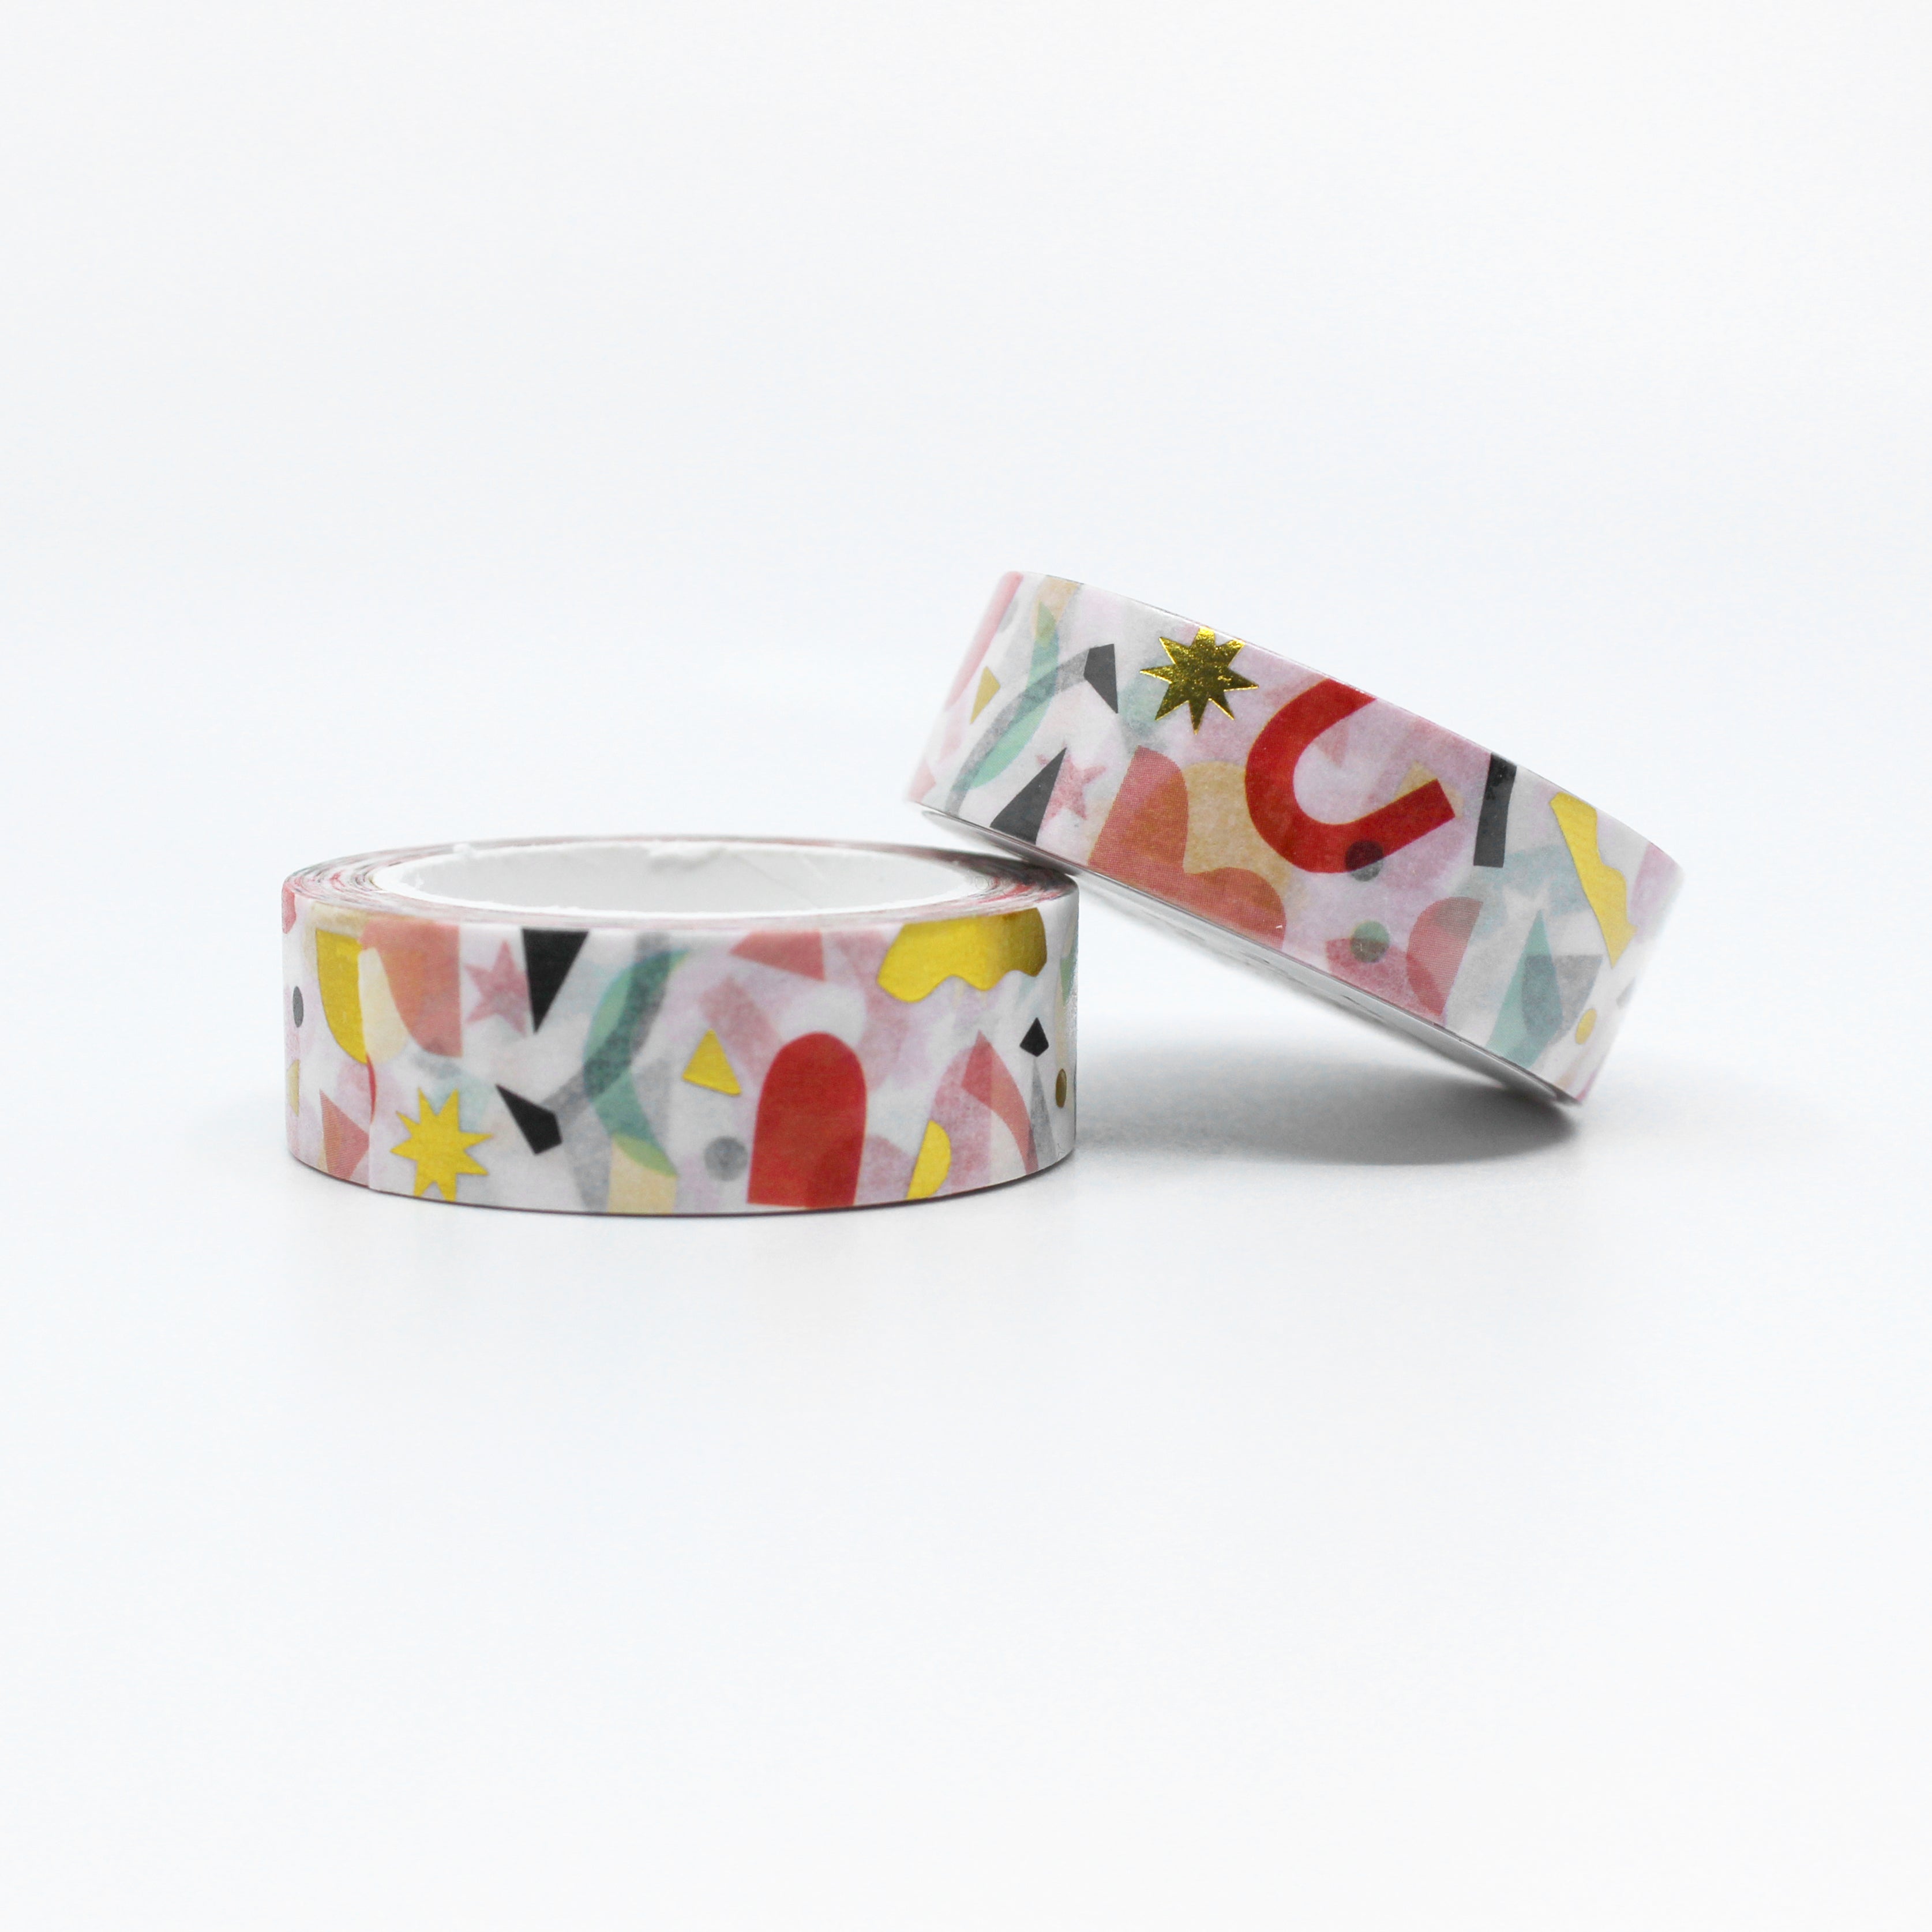 This is a photo of two modern confetti washi tapes for journaling and crafts from BBB Supplies.